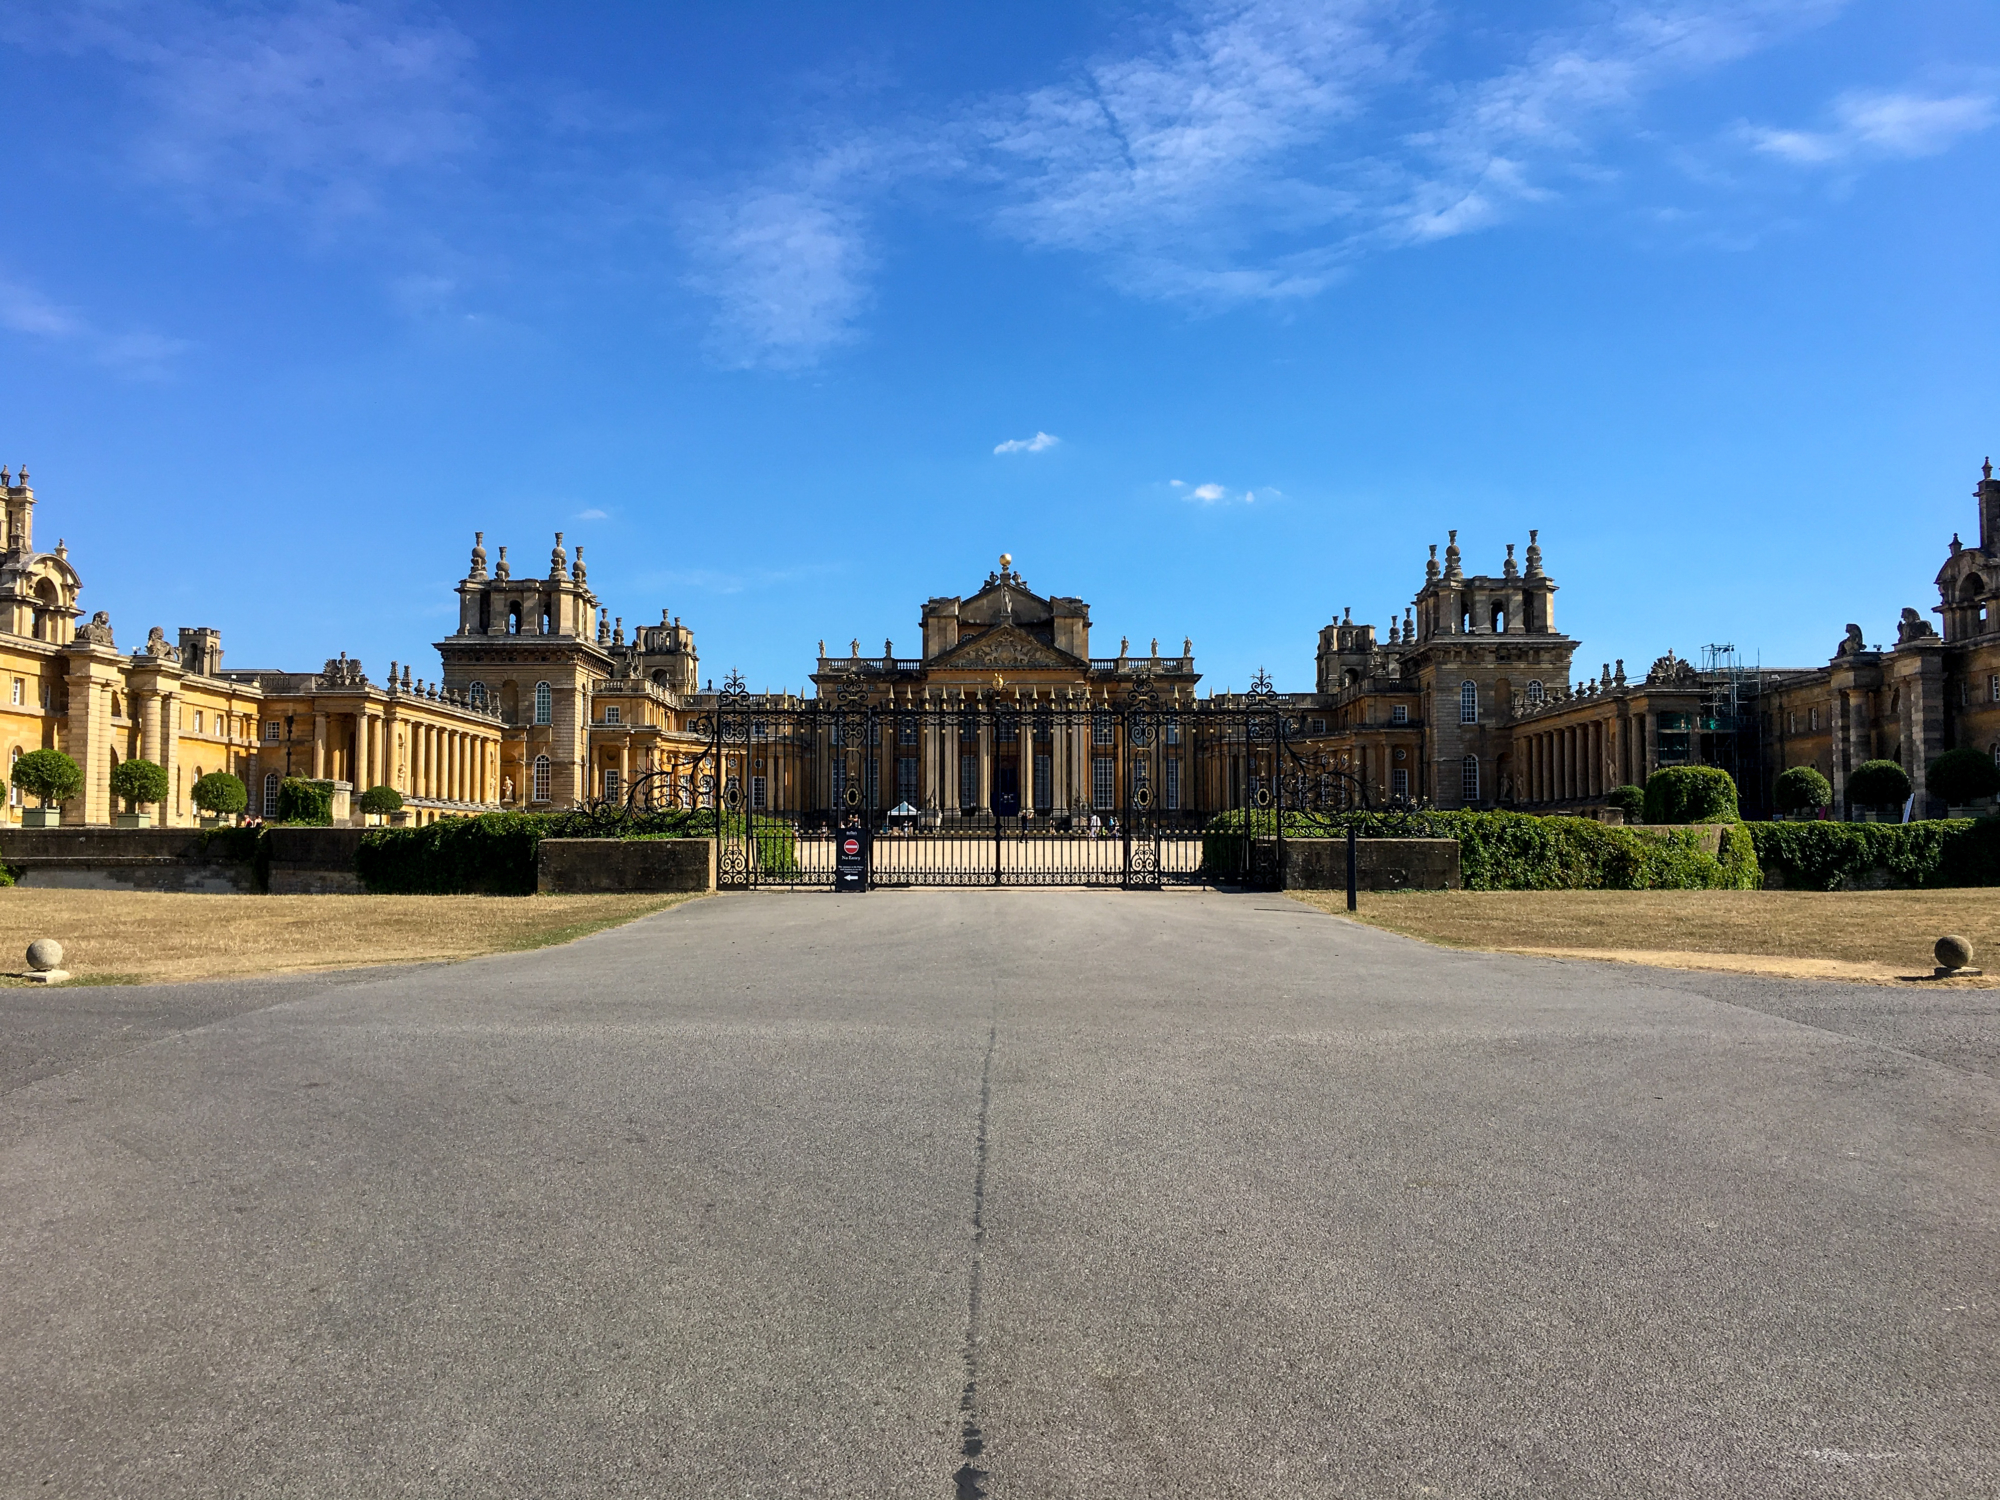 A Day Visit To Blenheim Palace & Gardens In Oxfordshire